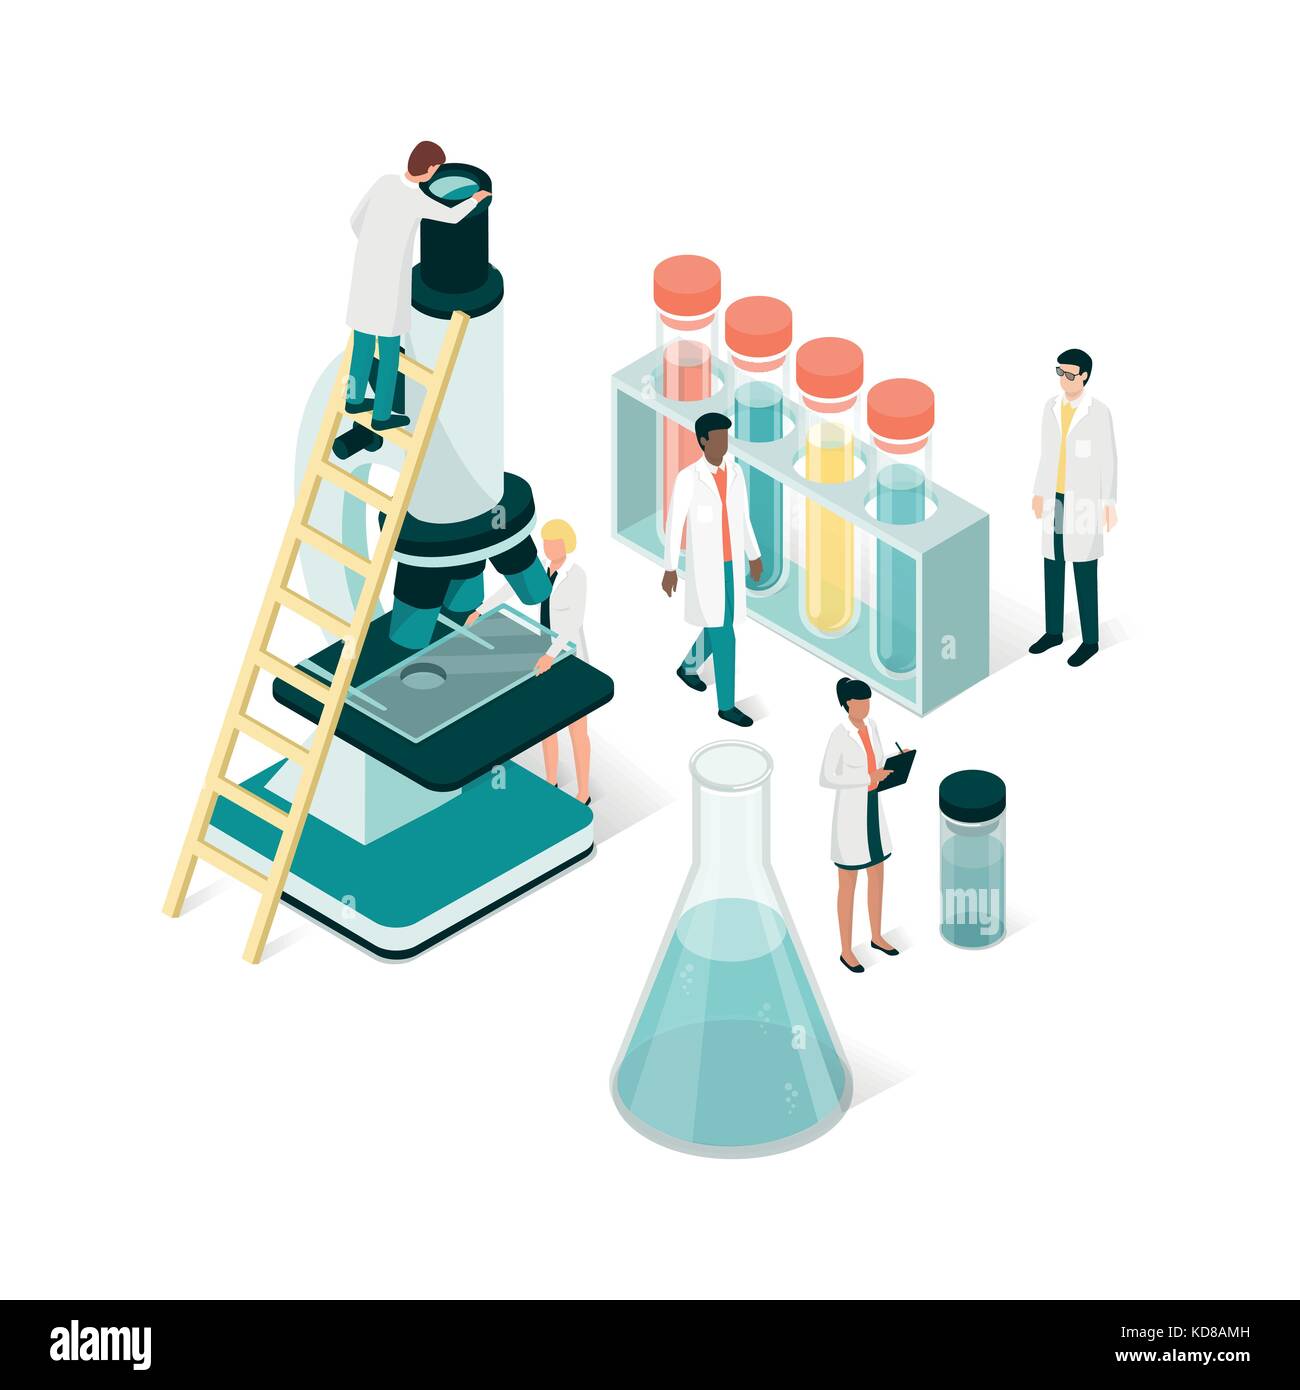 Researchers in the laboratory, they are analyzing a sample using a microscope and checking test tubes: science and medical research concept Stock Vector